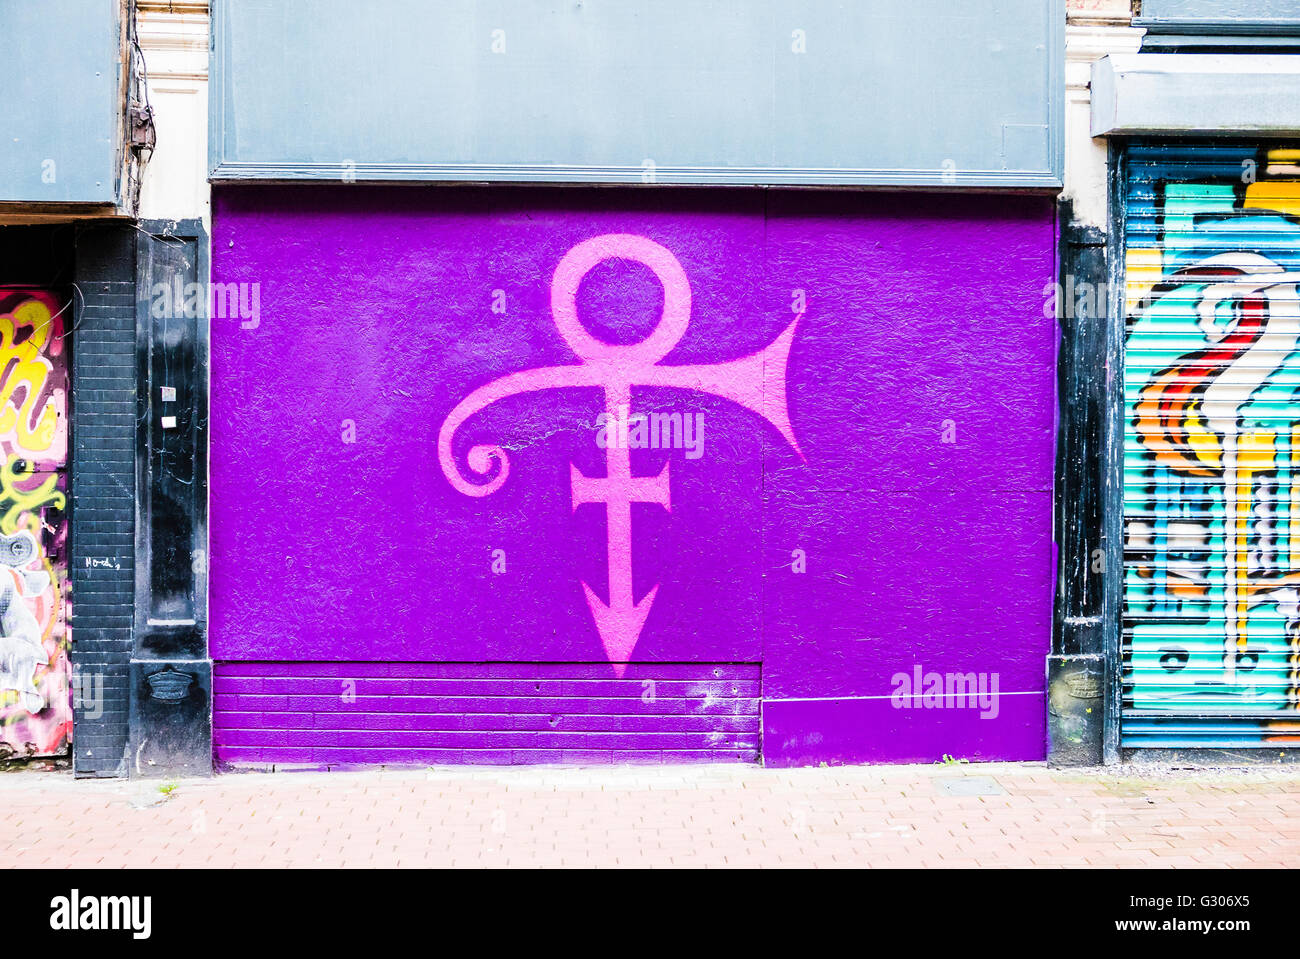 A tribute is painted on the front of a closed-down shop to the singer Prince who died in 2016, of his 'Symbol' on a purple backg Stock Photo